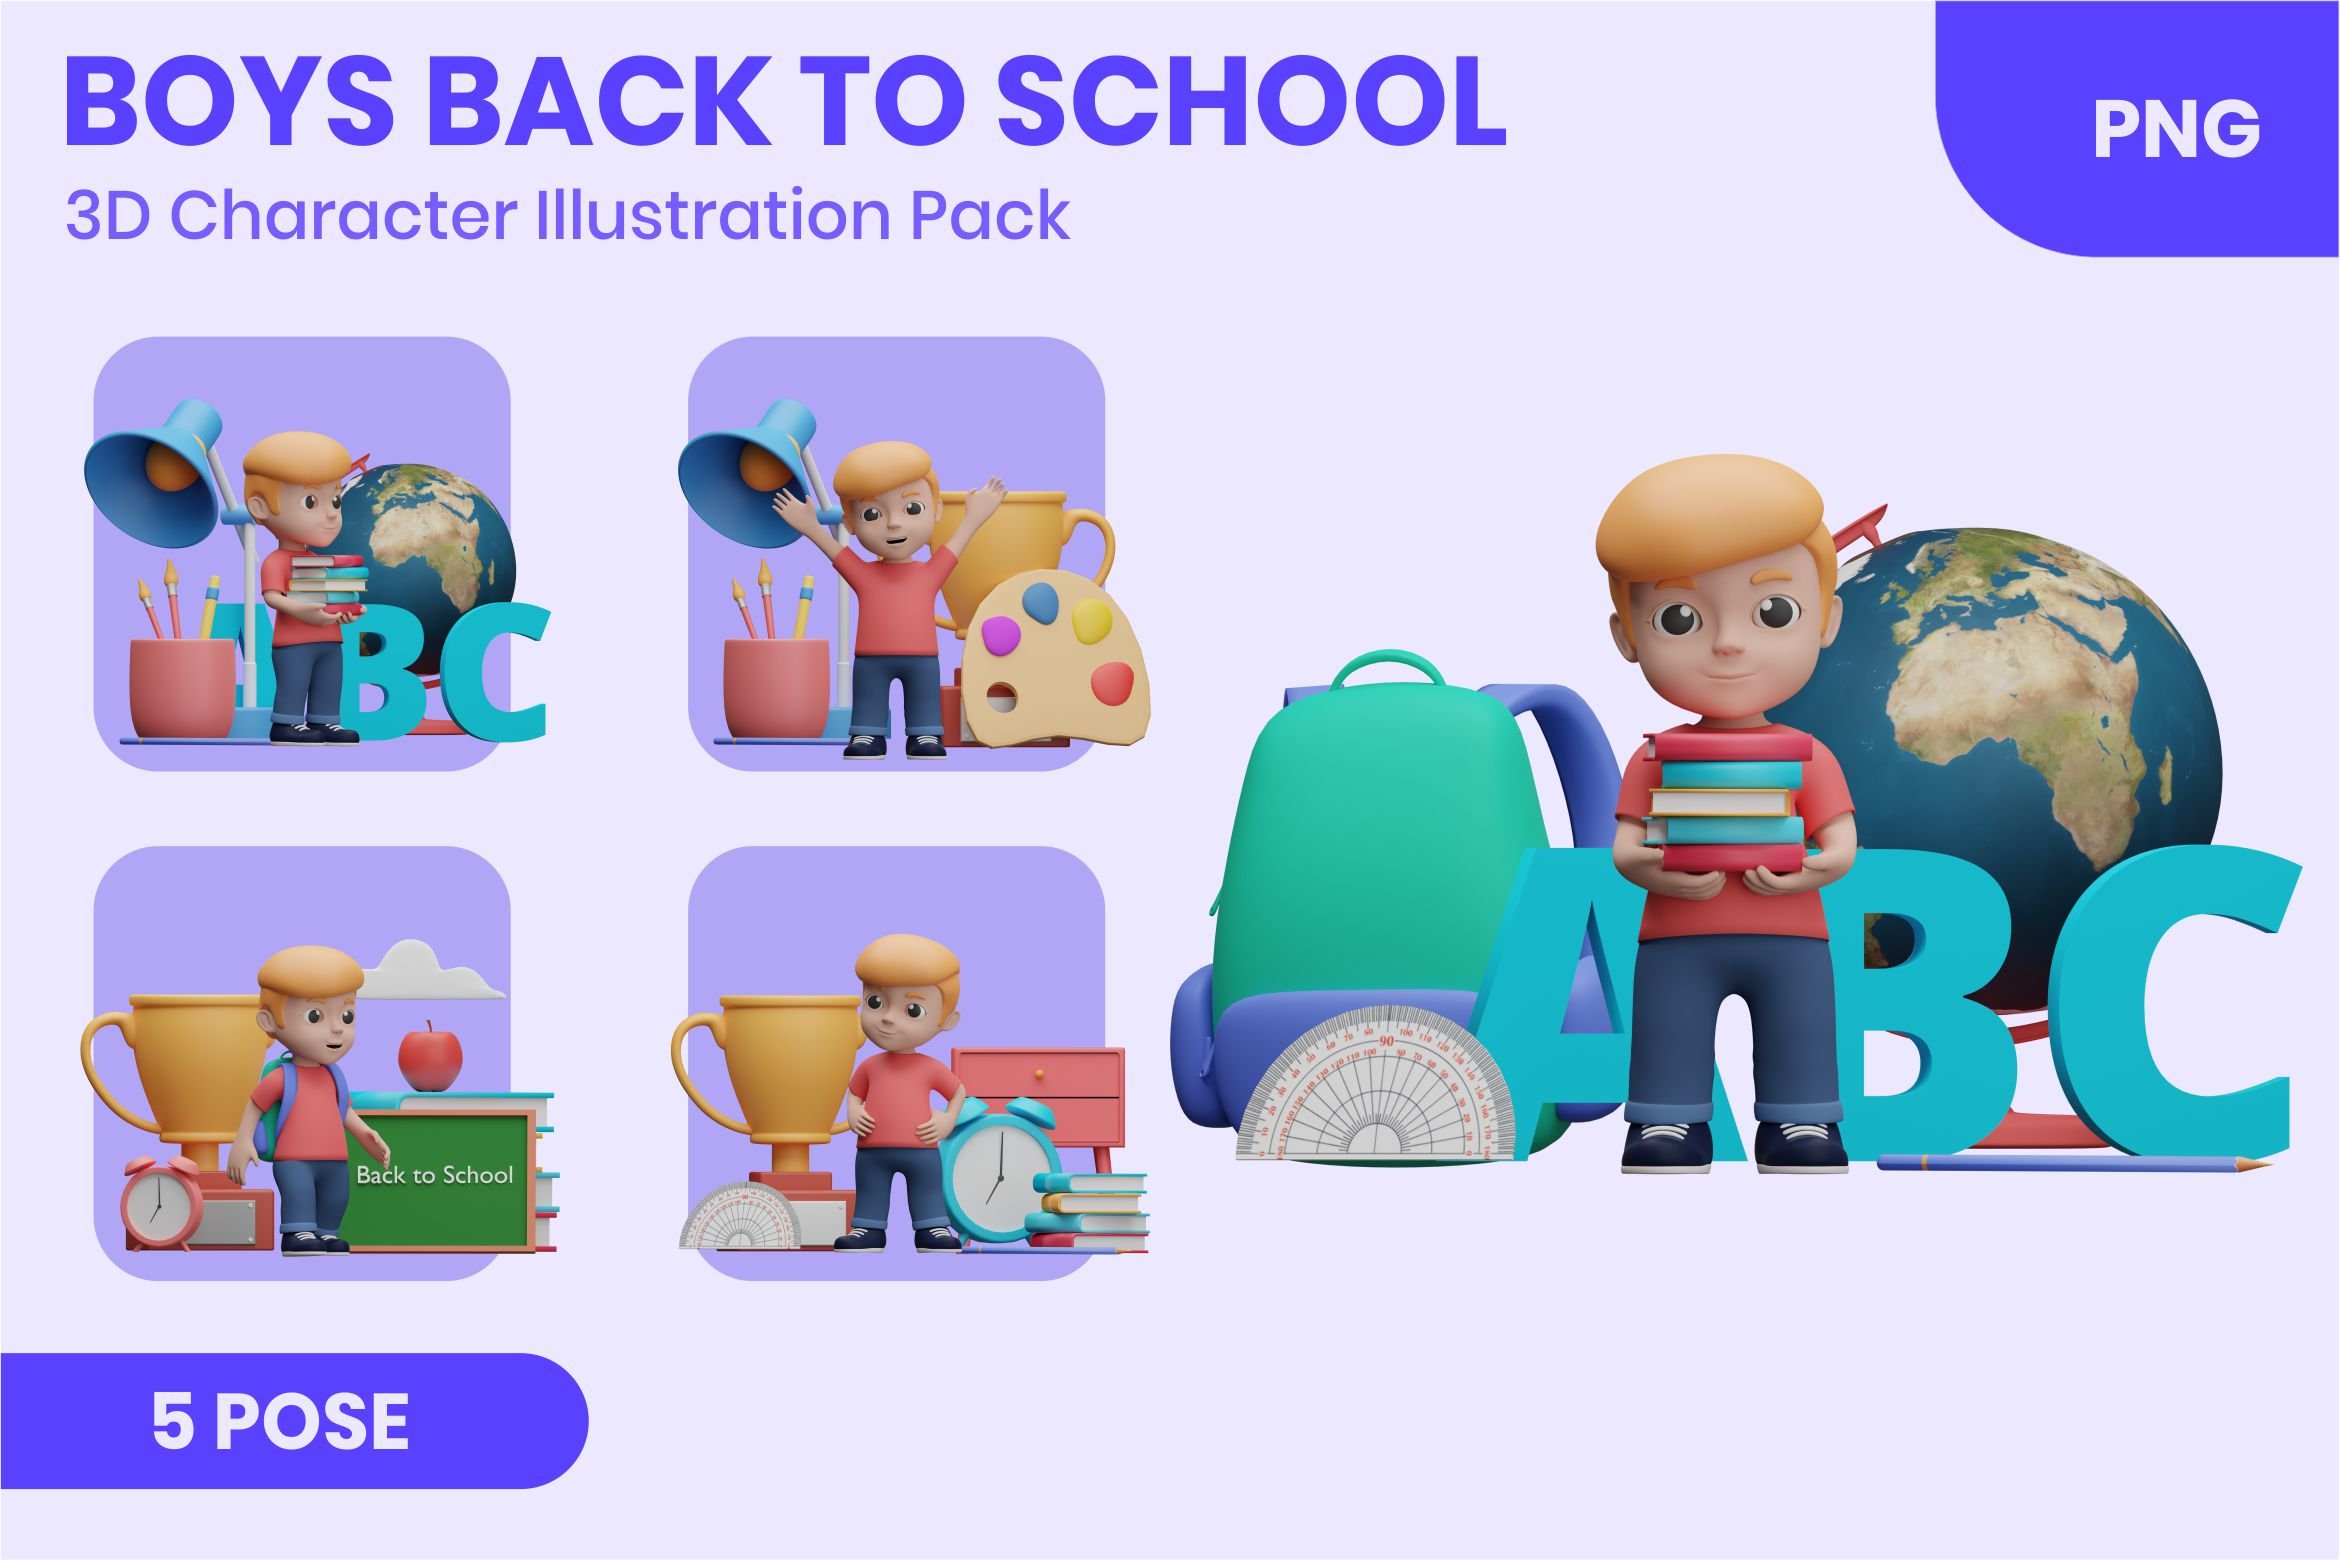 Boys Back to School 3d Character cover image.